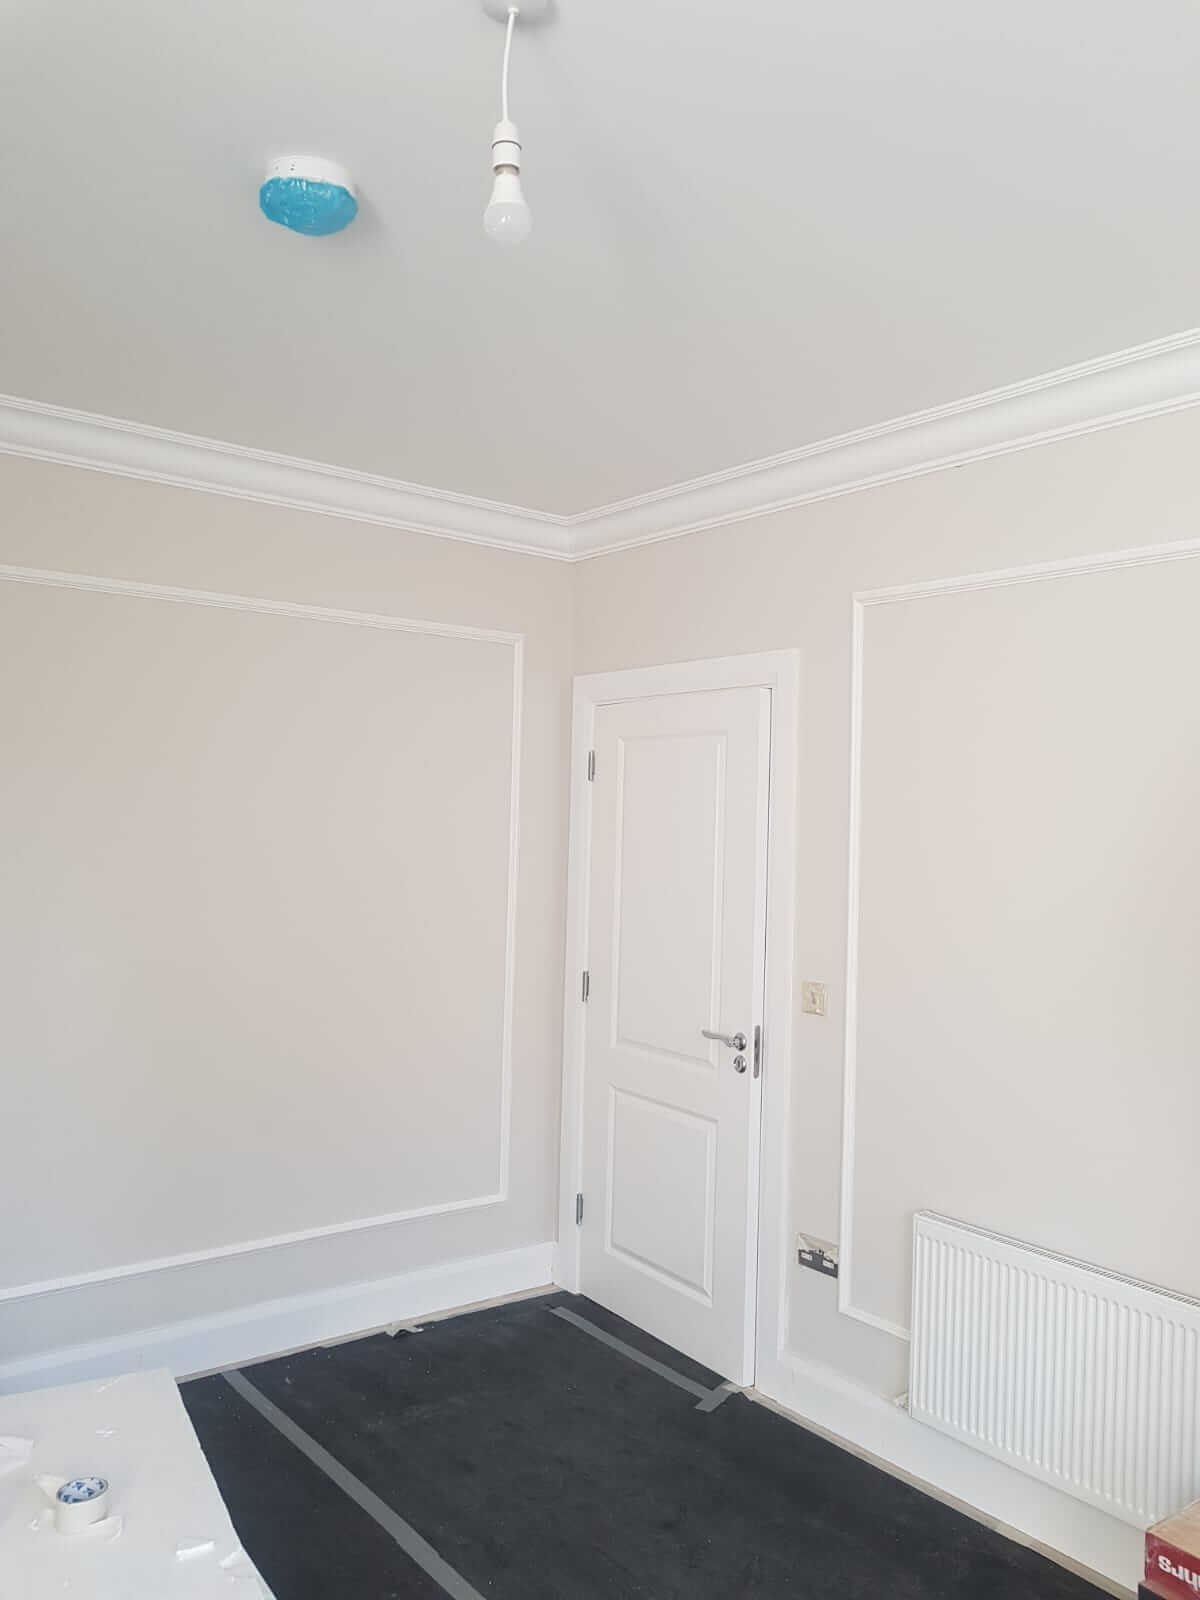 Charlotte - Modern Coving in a room with a white colour scheme